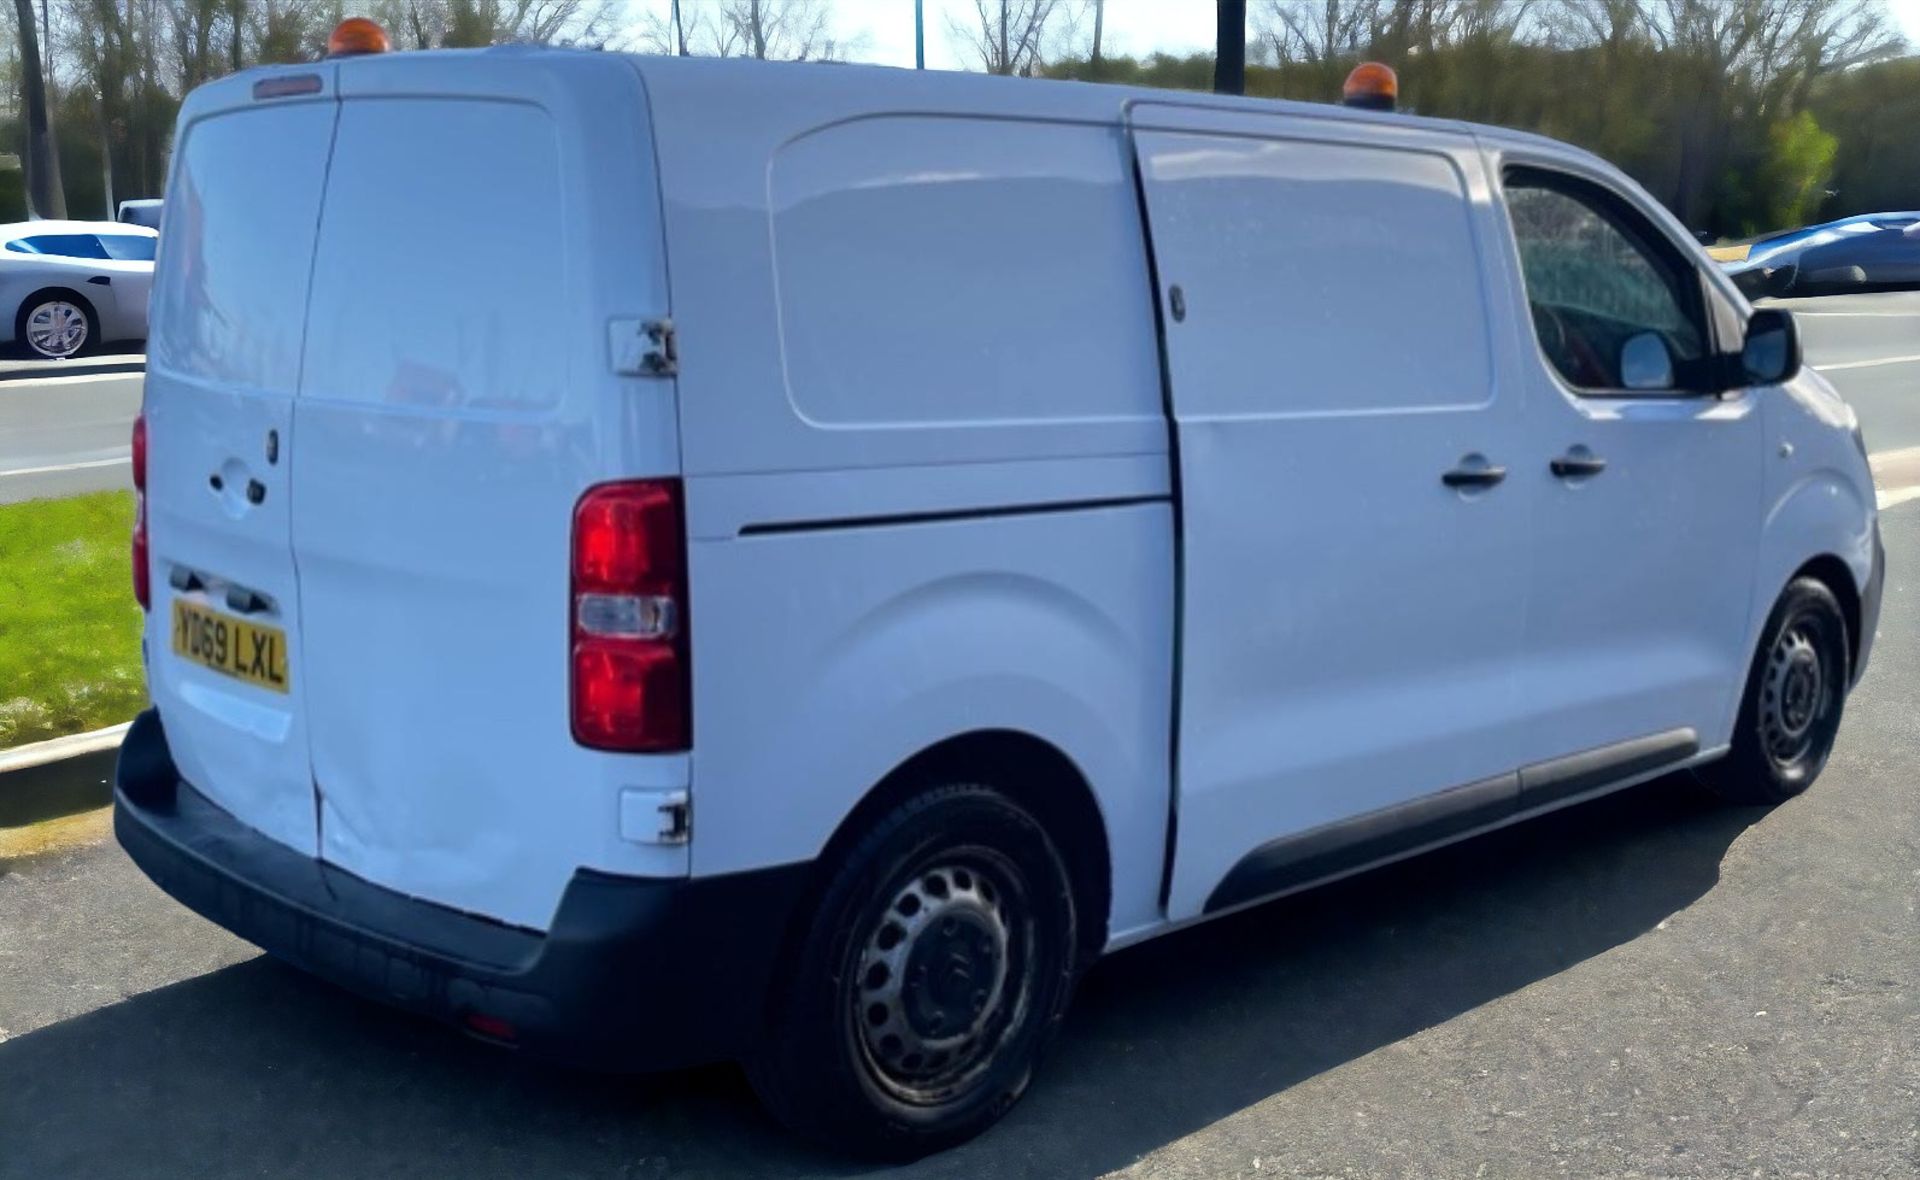 2019-69 REG CITROEN DISPATCH XS 1000 L1H1 - HPI CLEAR - READY TO GO! - Image 3 of 12